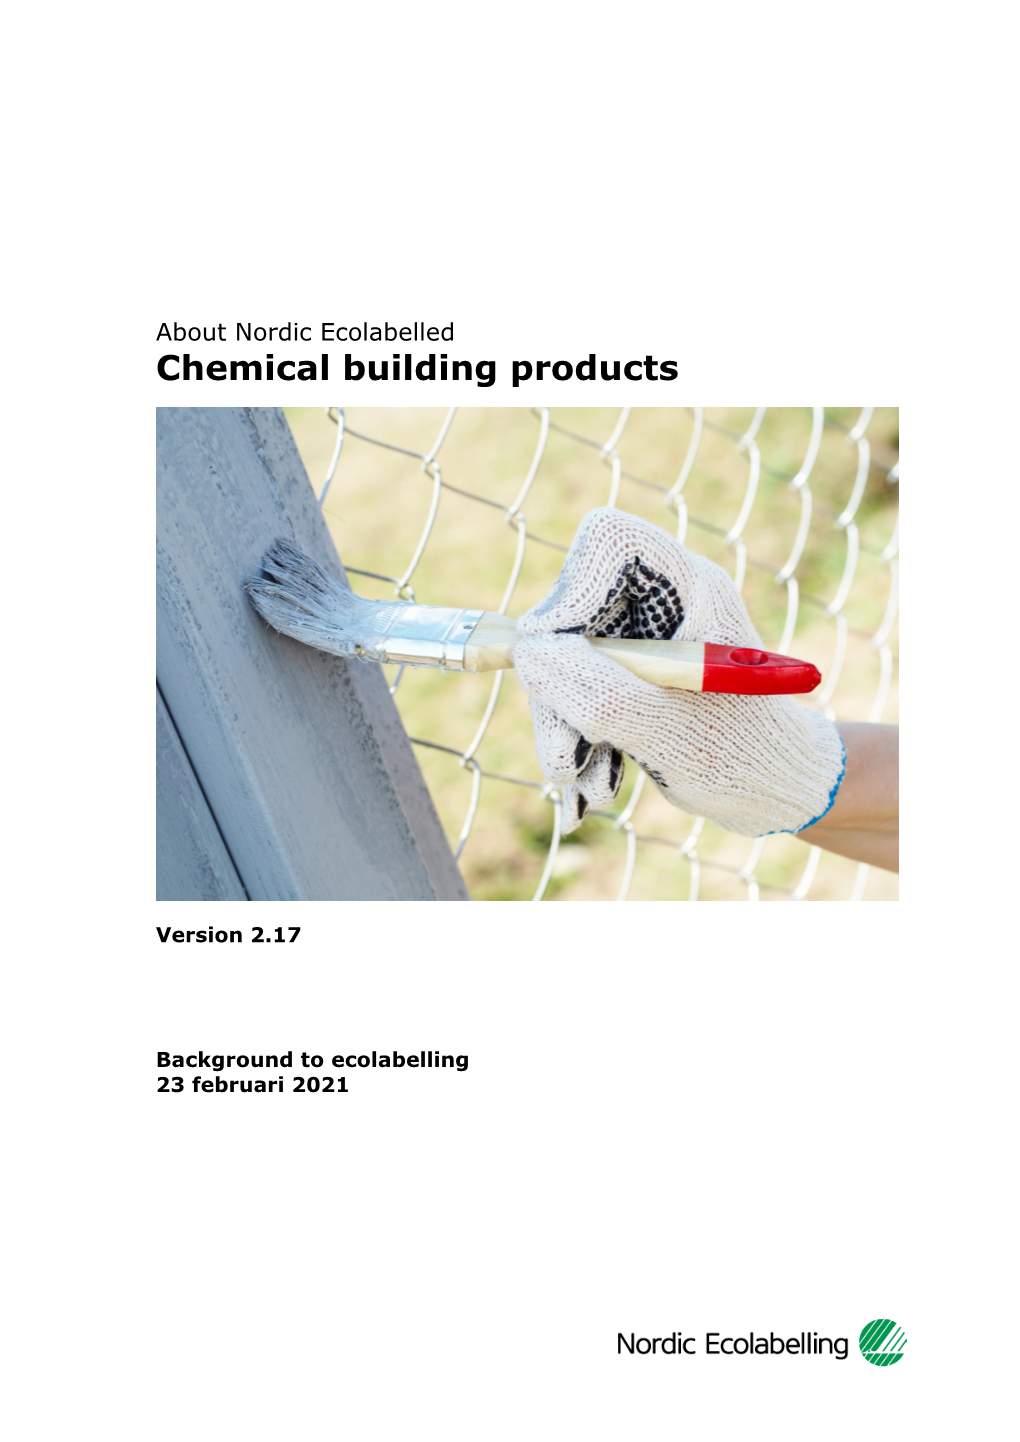 Chemical Building Products